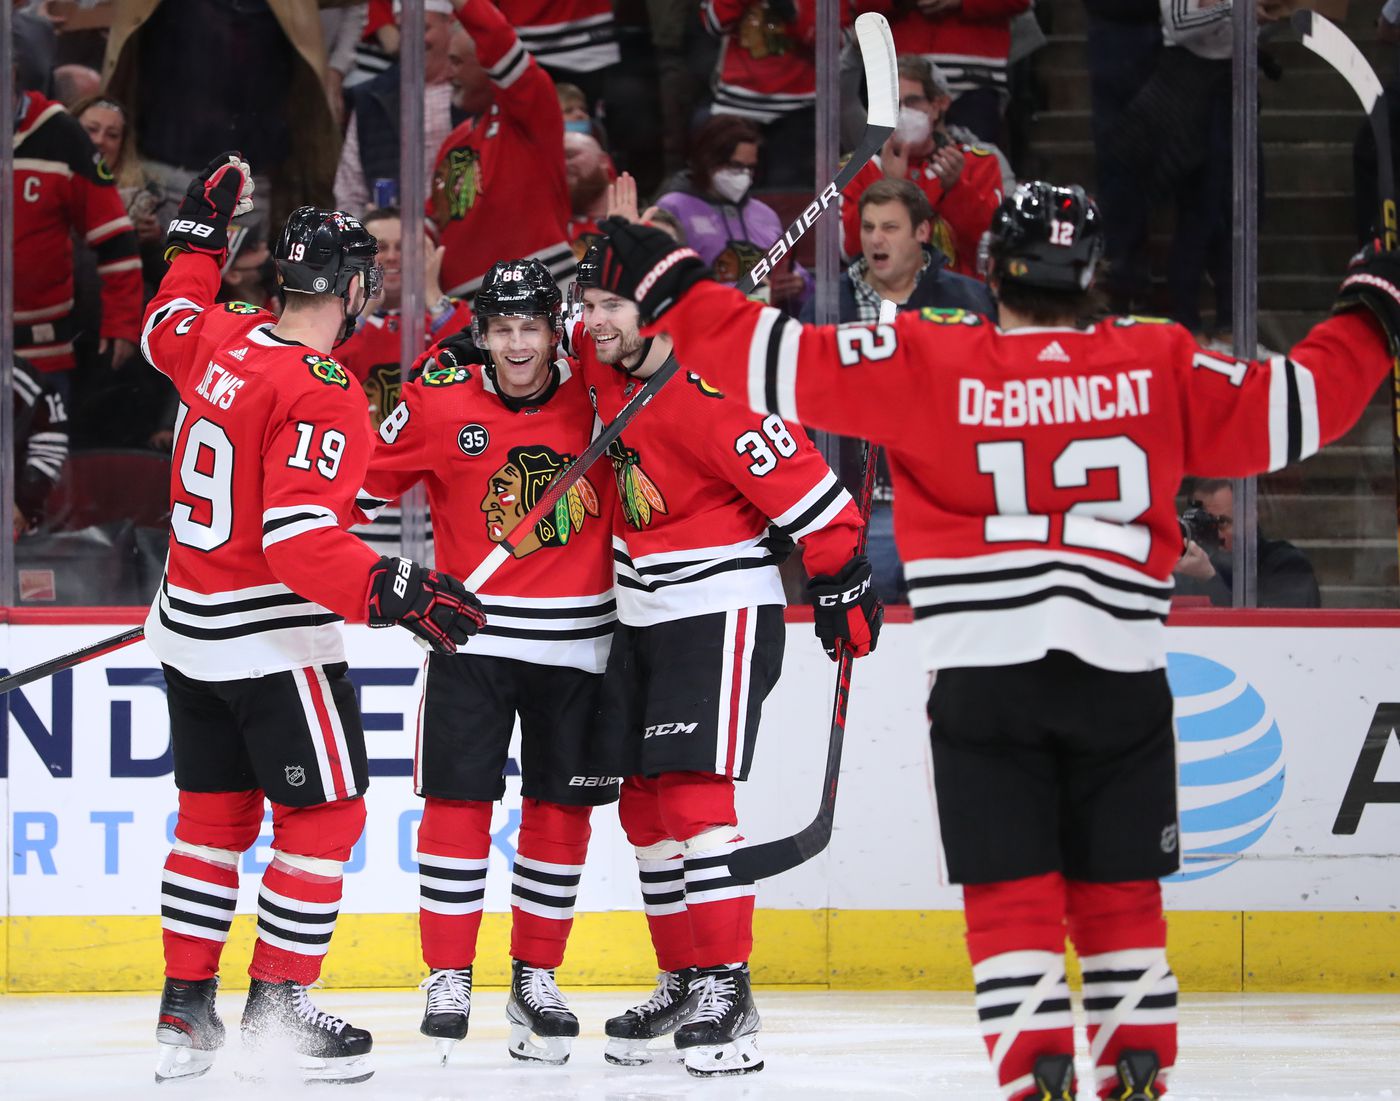 Chicago Blackhawks players congratulate right wing Patrick Kane (88) after Kane scores a goal in the third period against the Montreal Canadiens at United Center on Jan. 13, 2022, in Chicago.